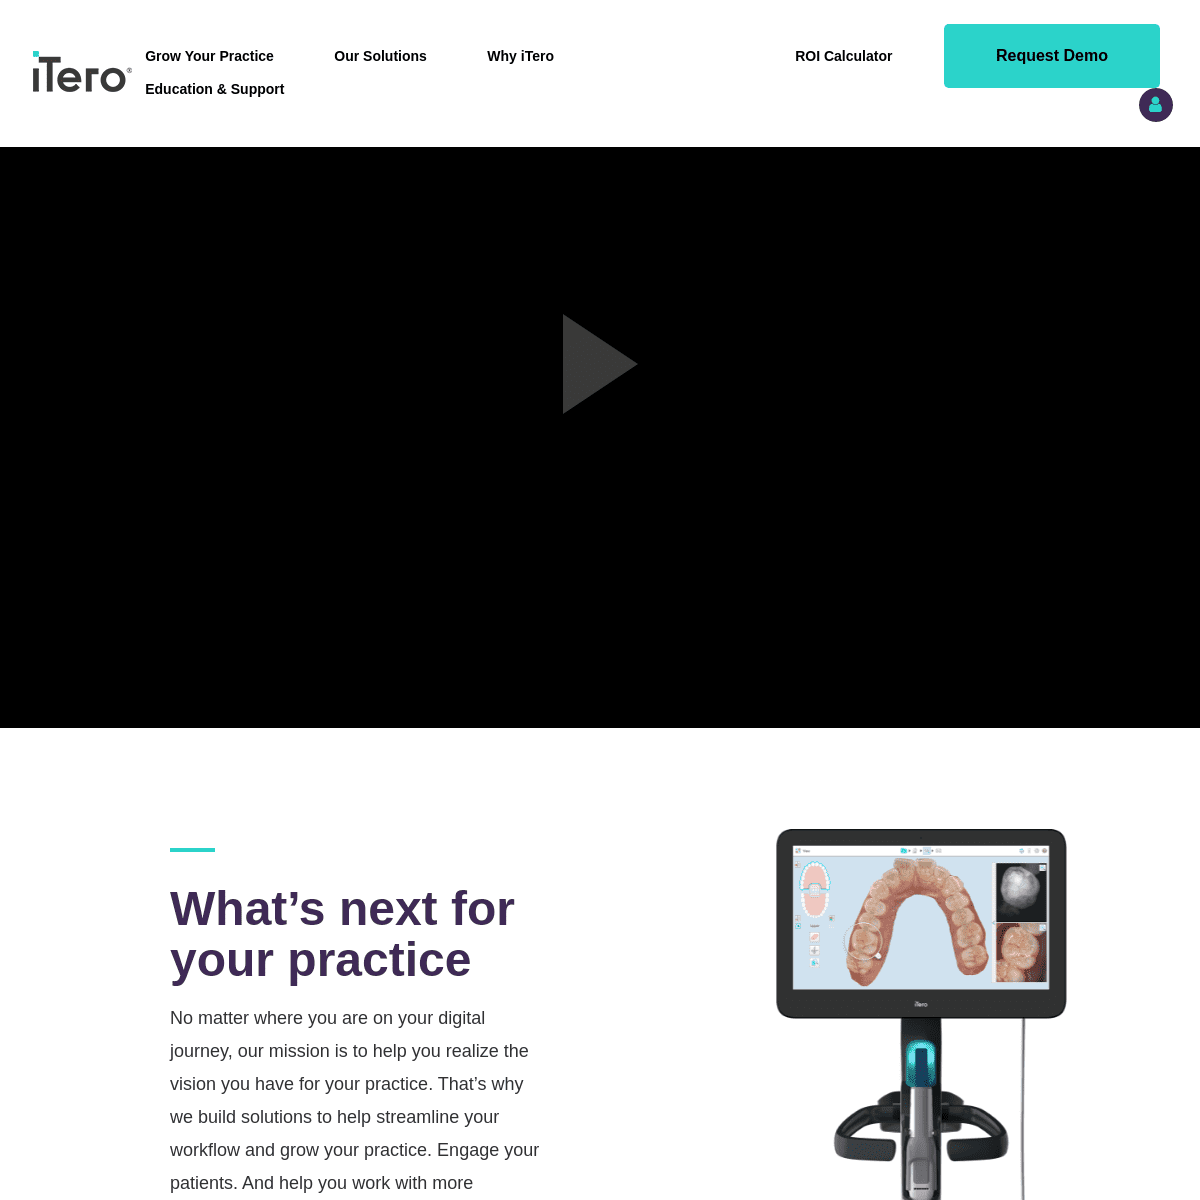 A complete backup of https://itero.com